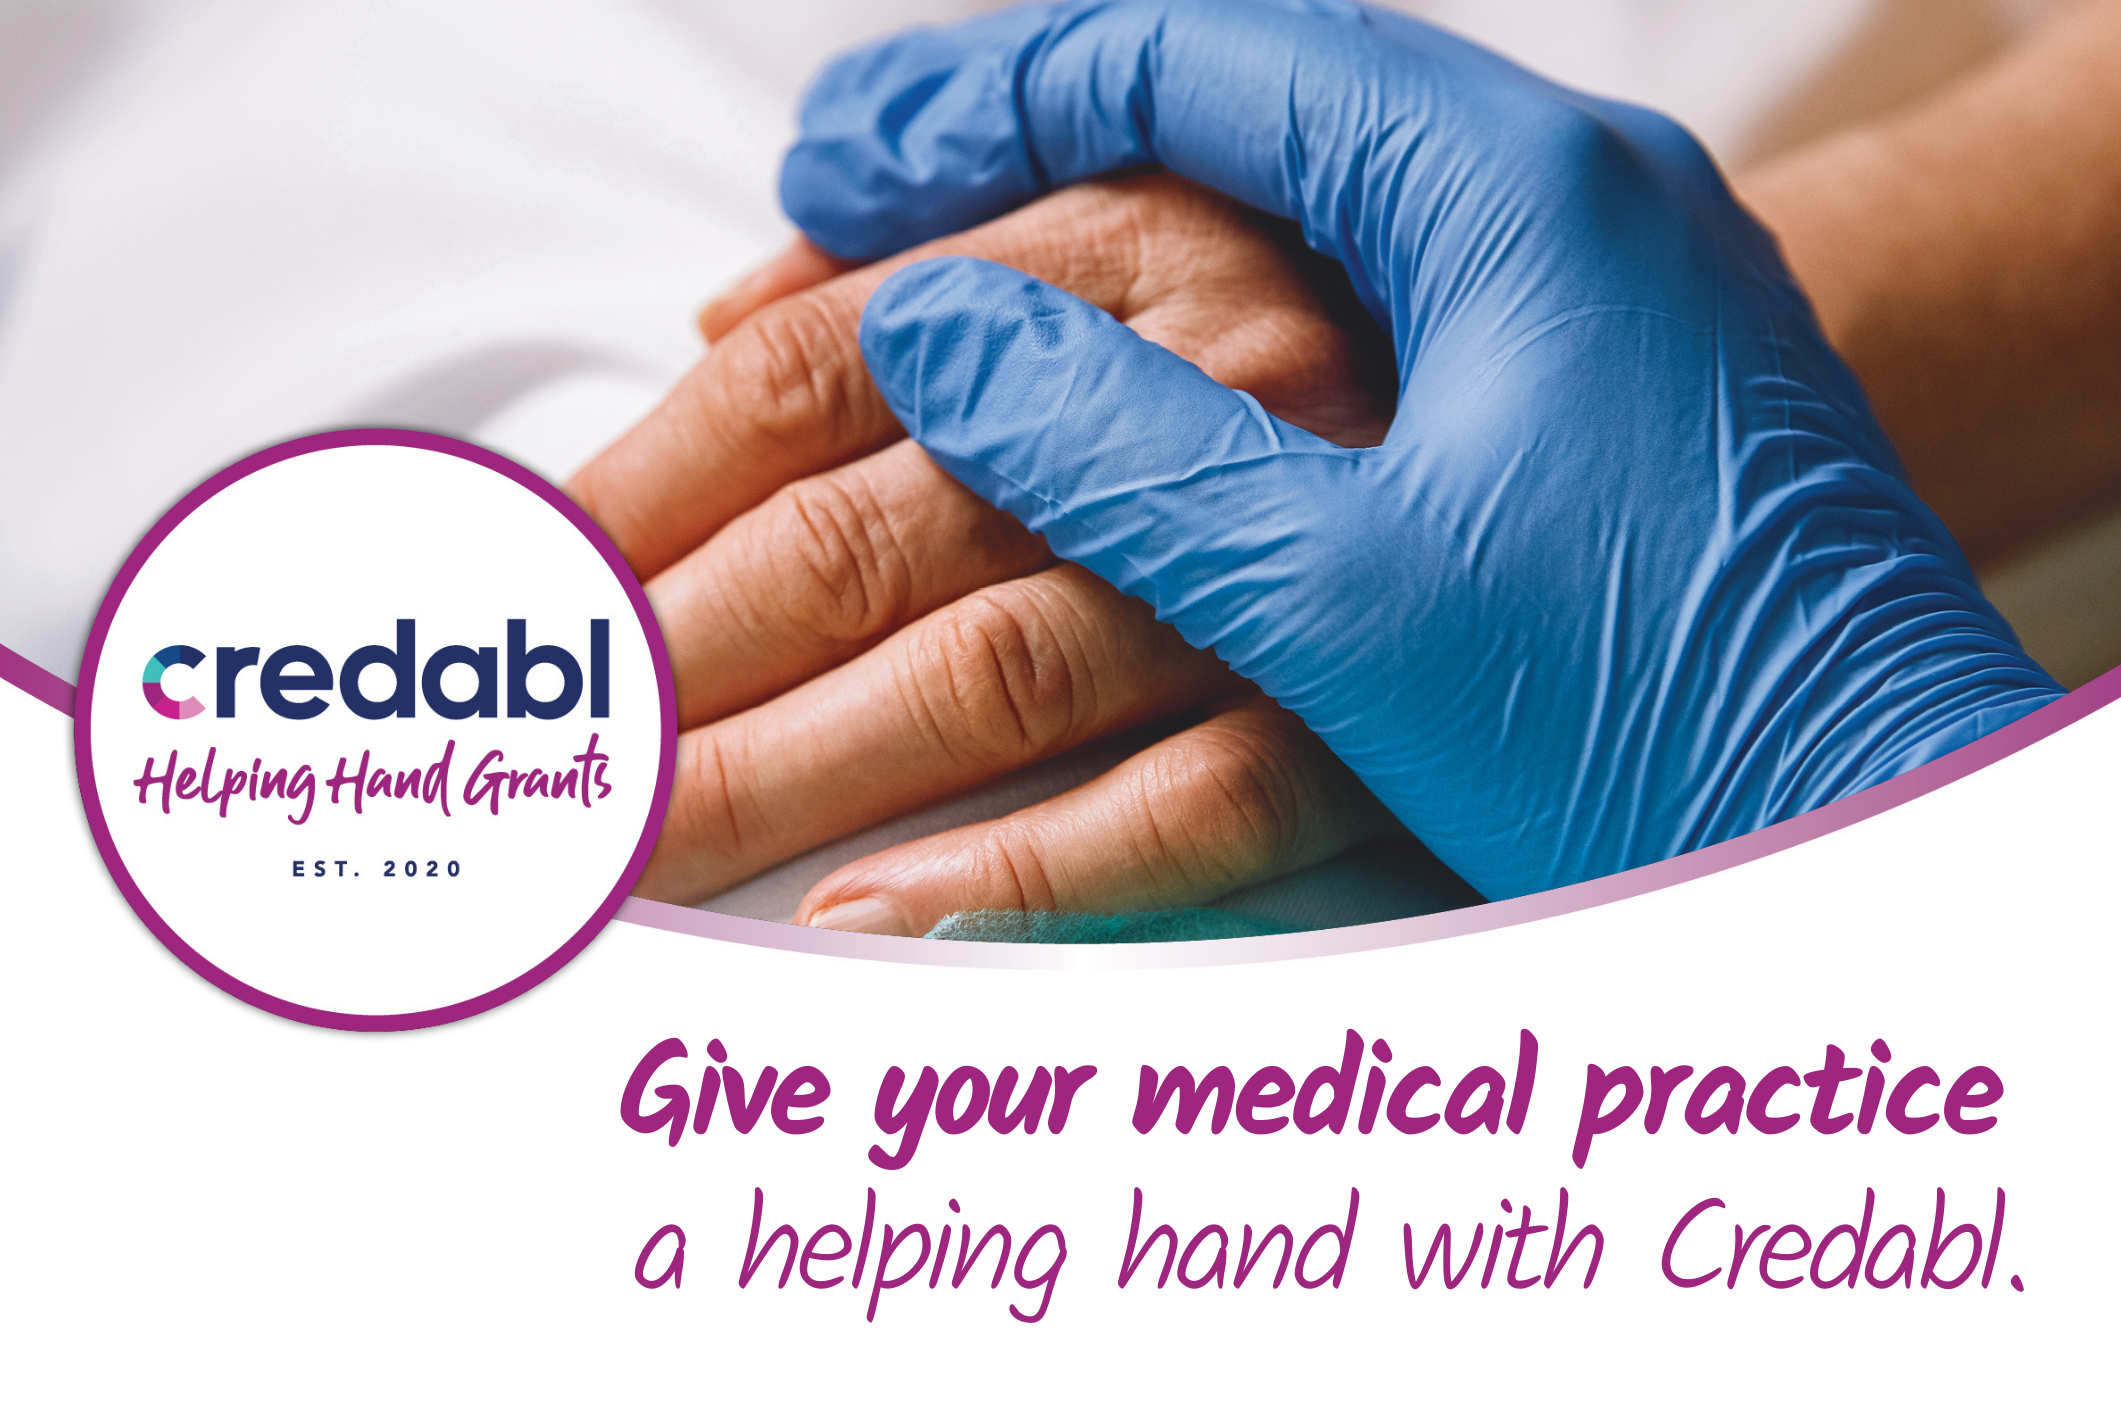 Press Release: Credabl launches Helping Hand Grants to support medical practices Image